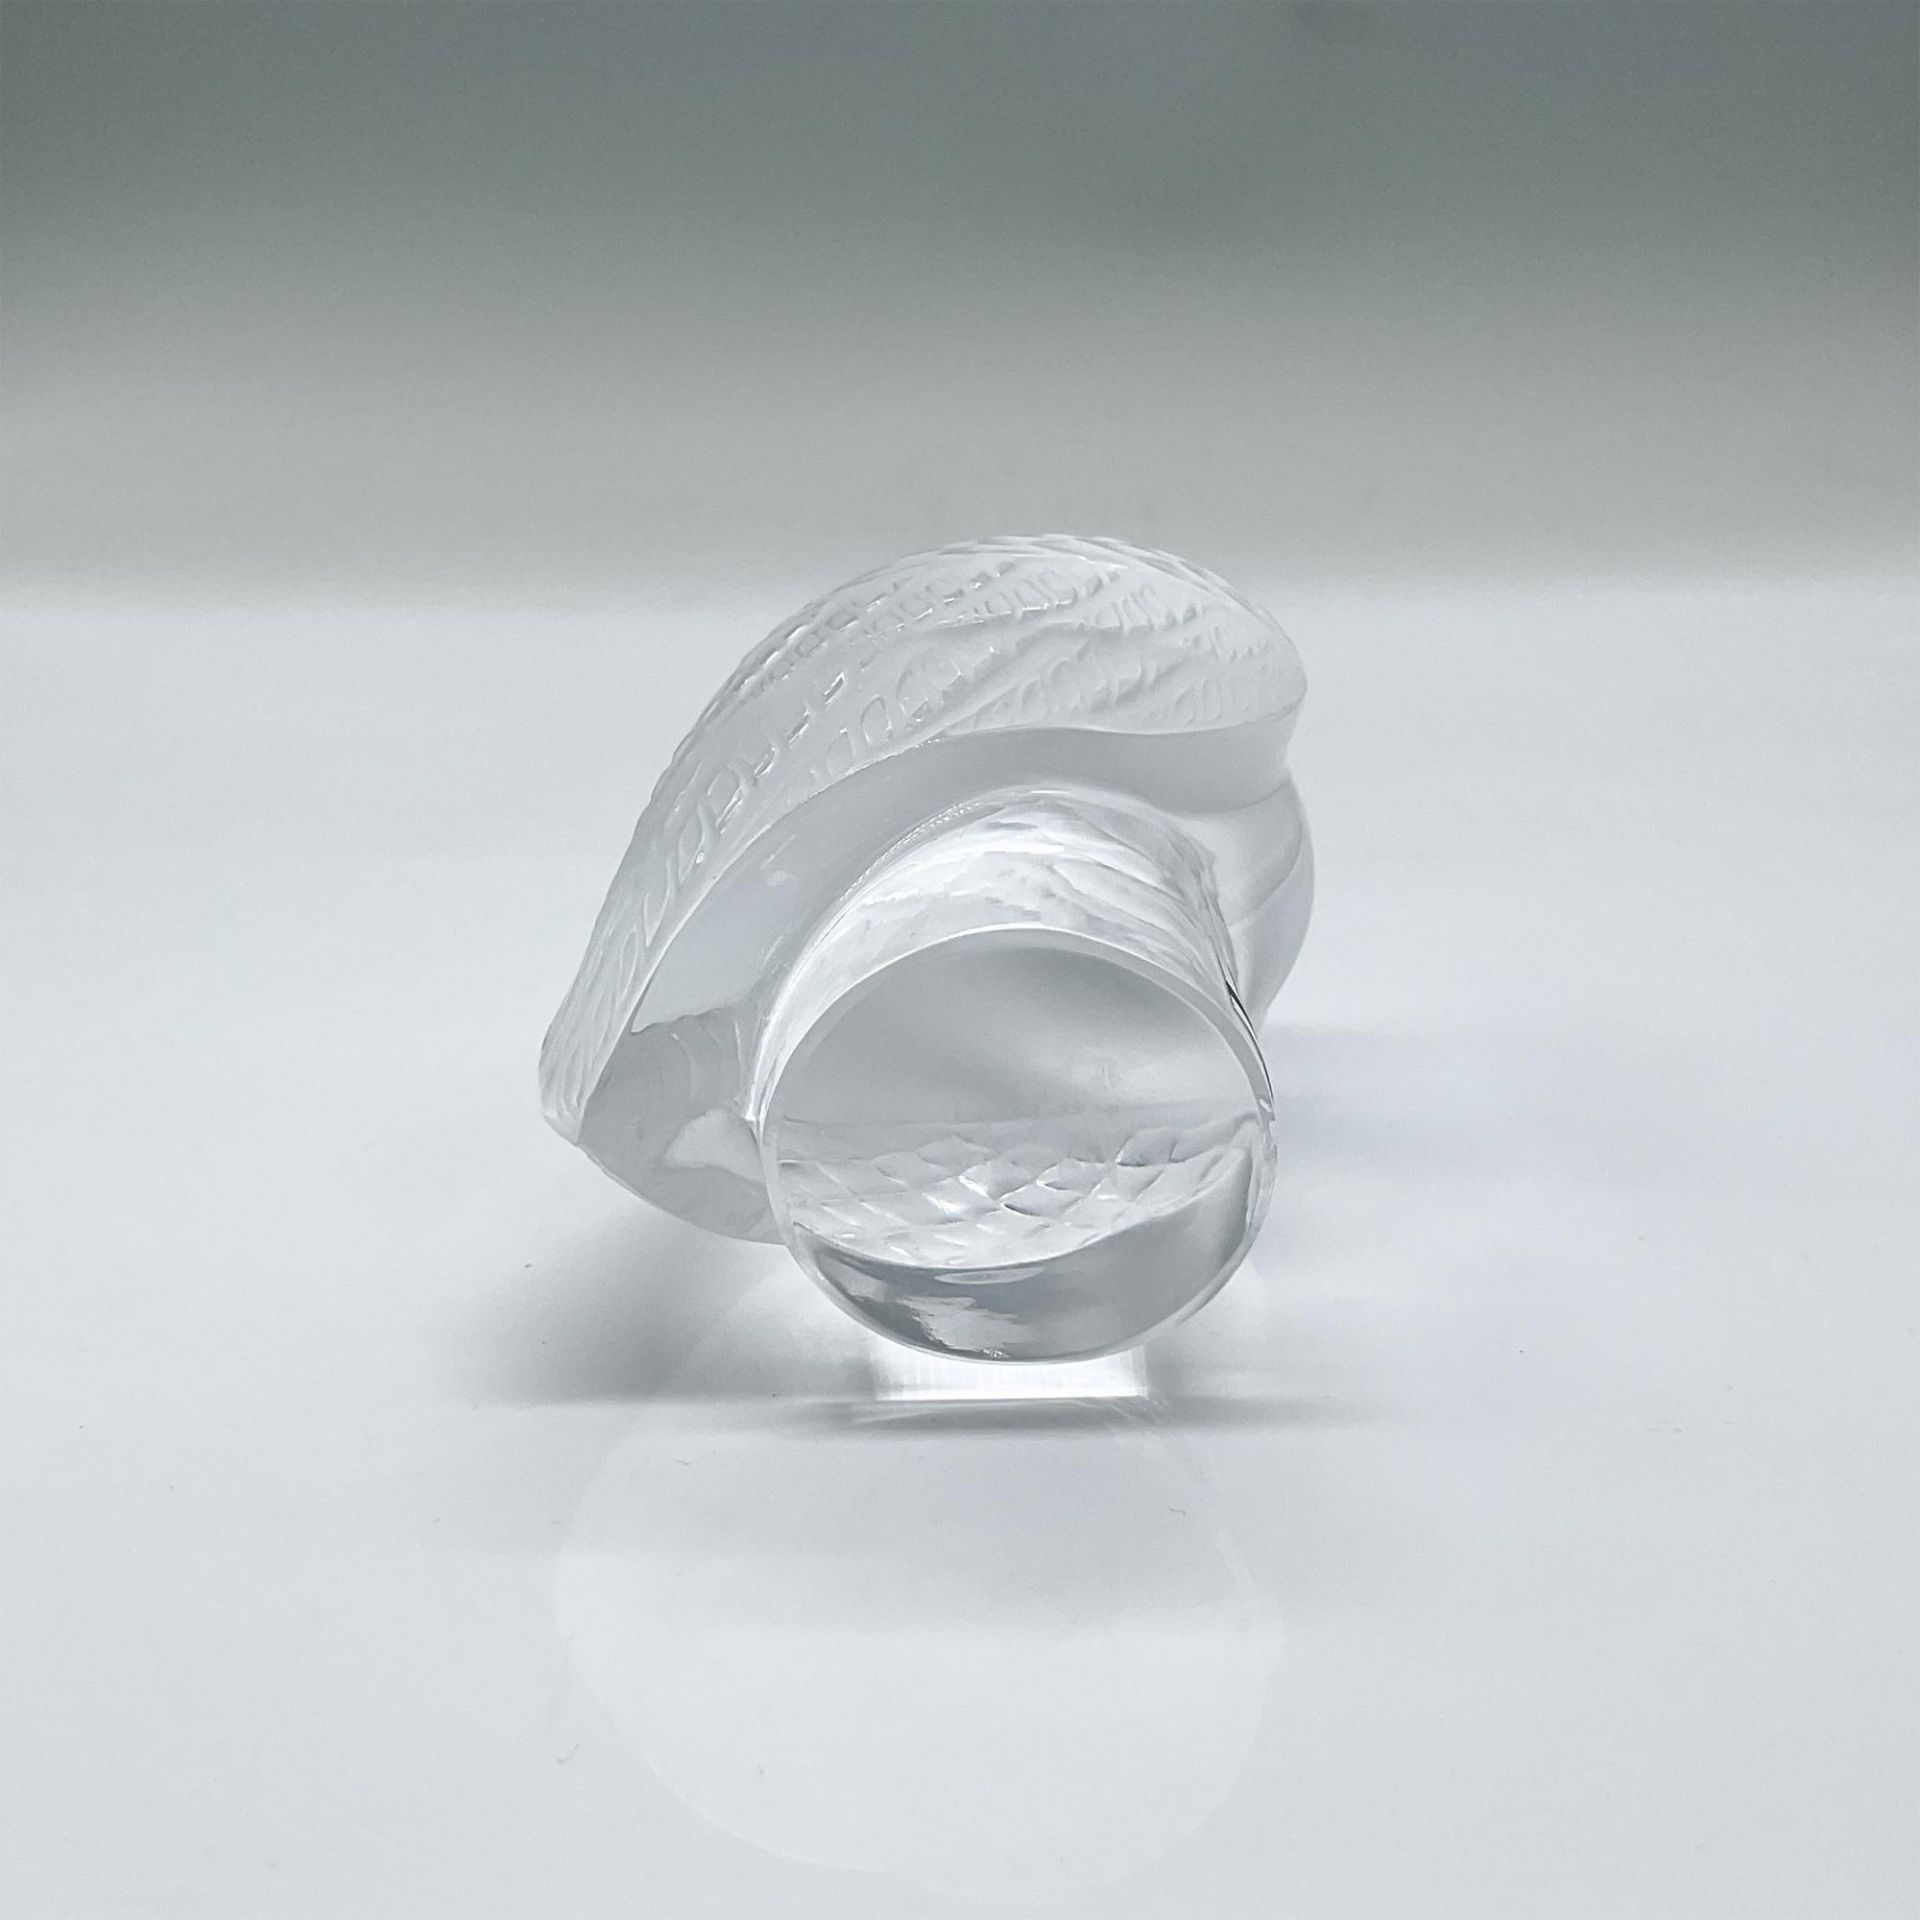 Lalique Crystal Figurine, Shivers Owl - Image 3 of 4